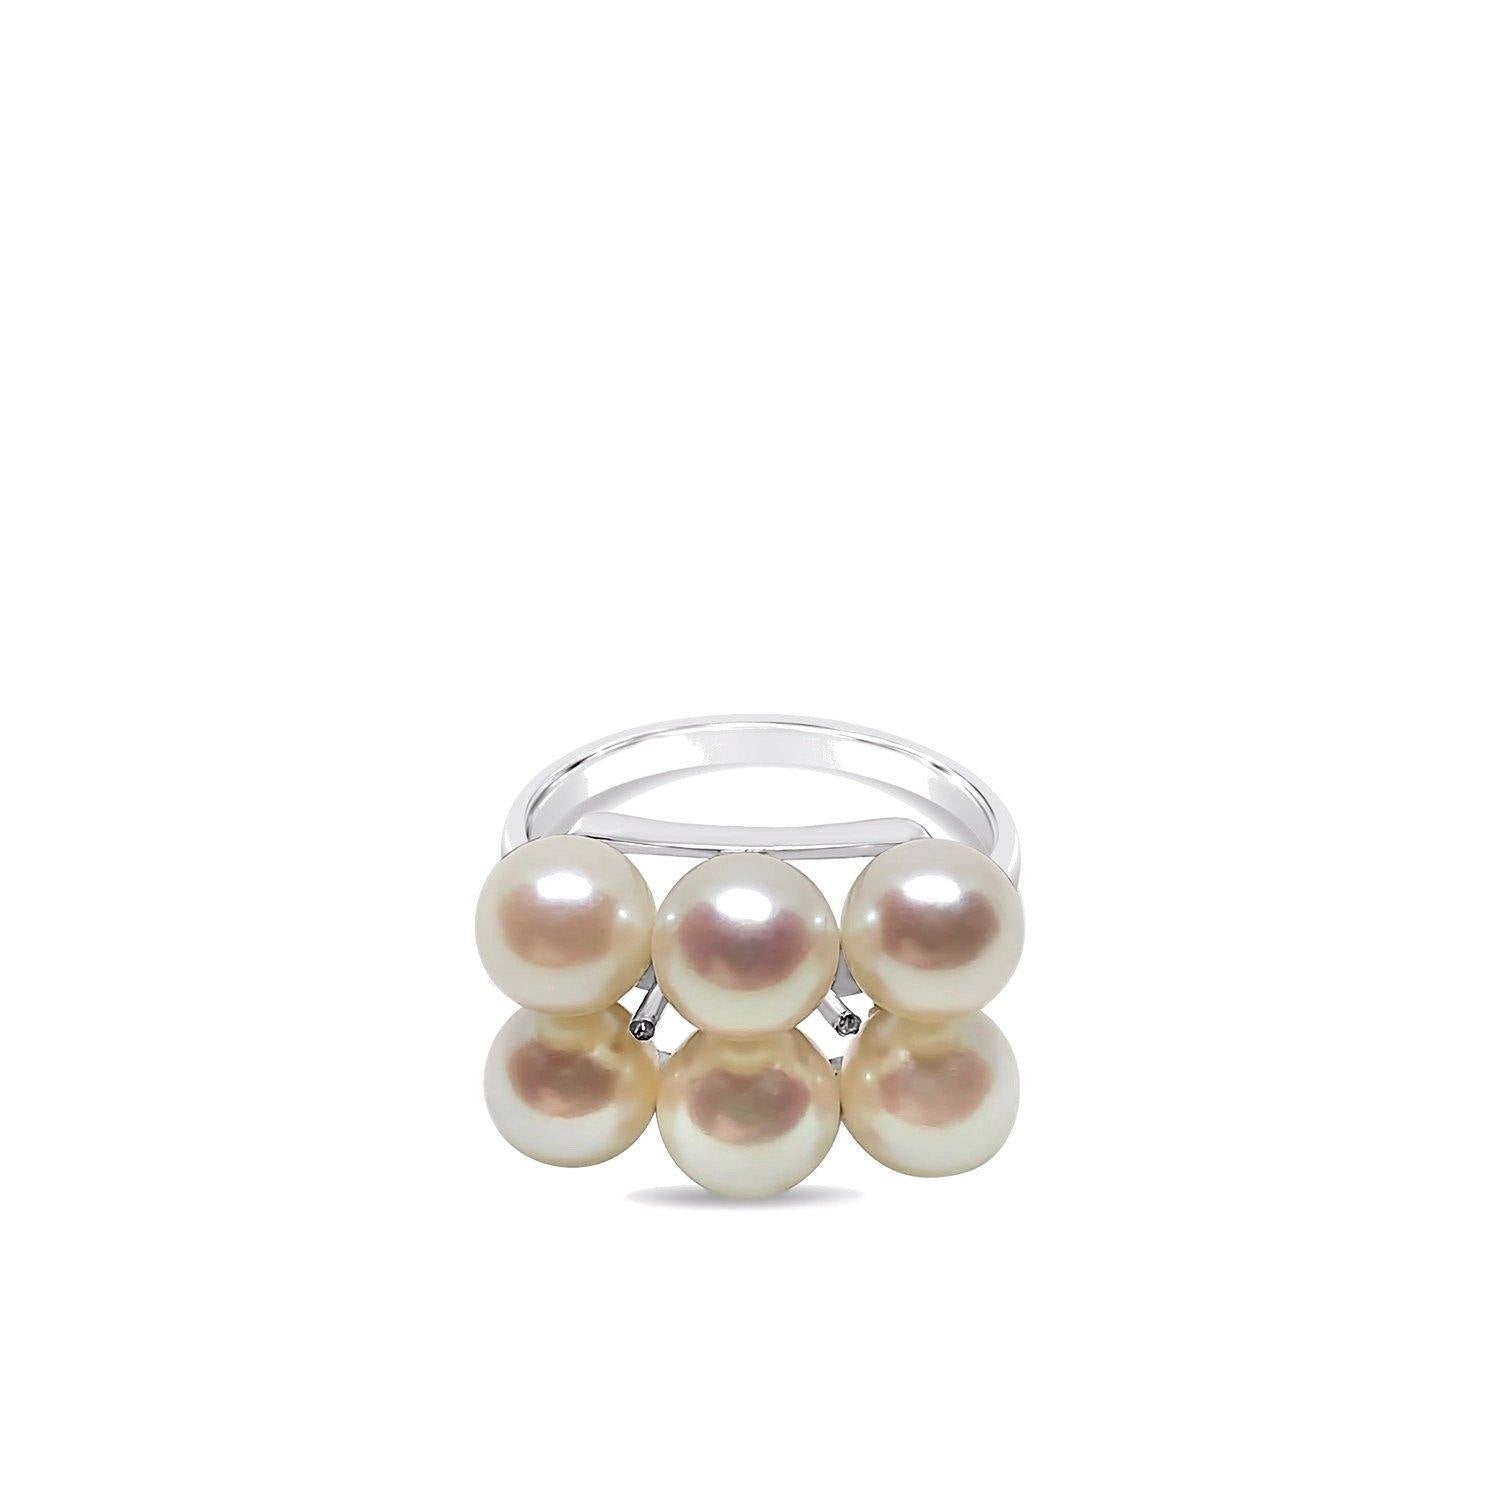 Double Row Japanese Saltwater Akoya Cultured Pearl Ring- Sterling Silver 